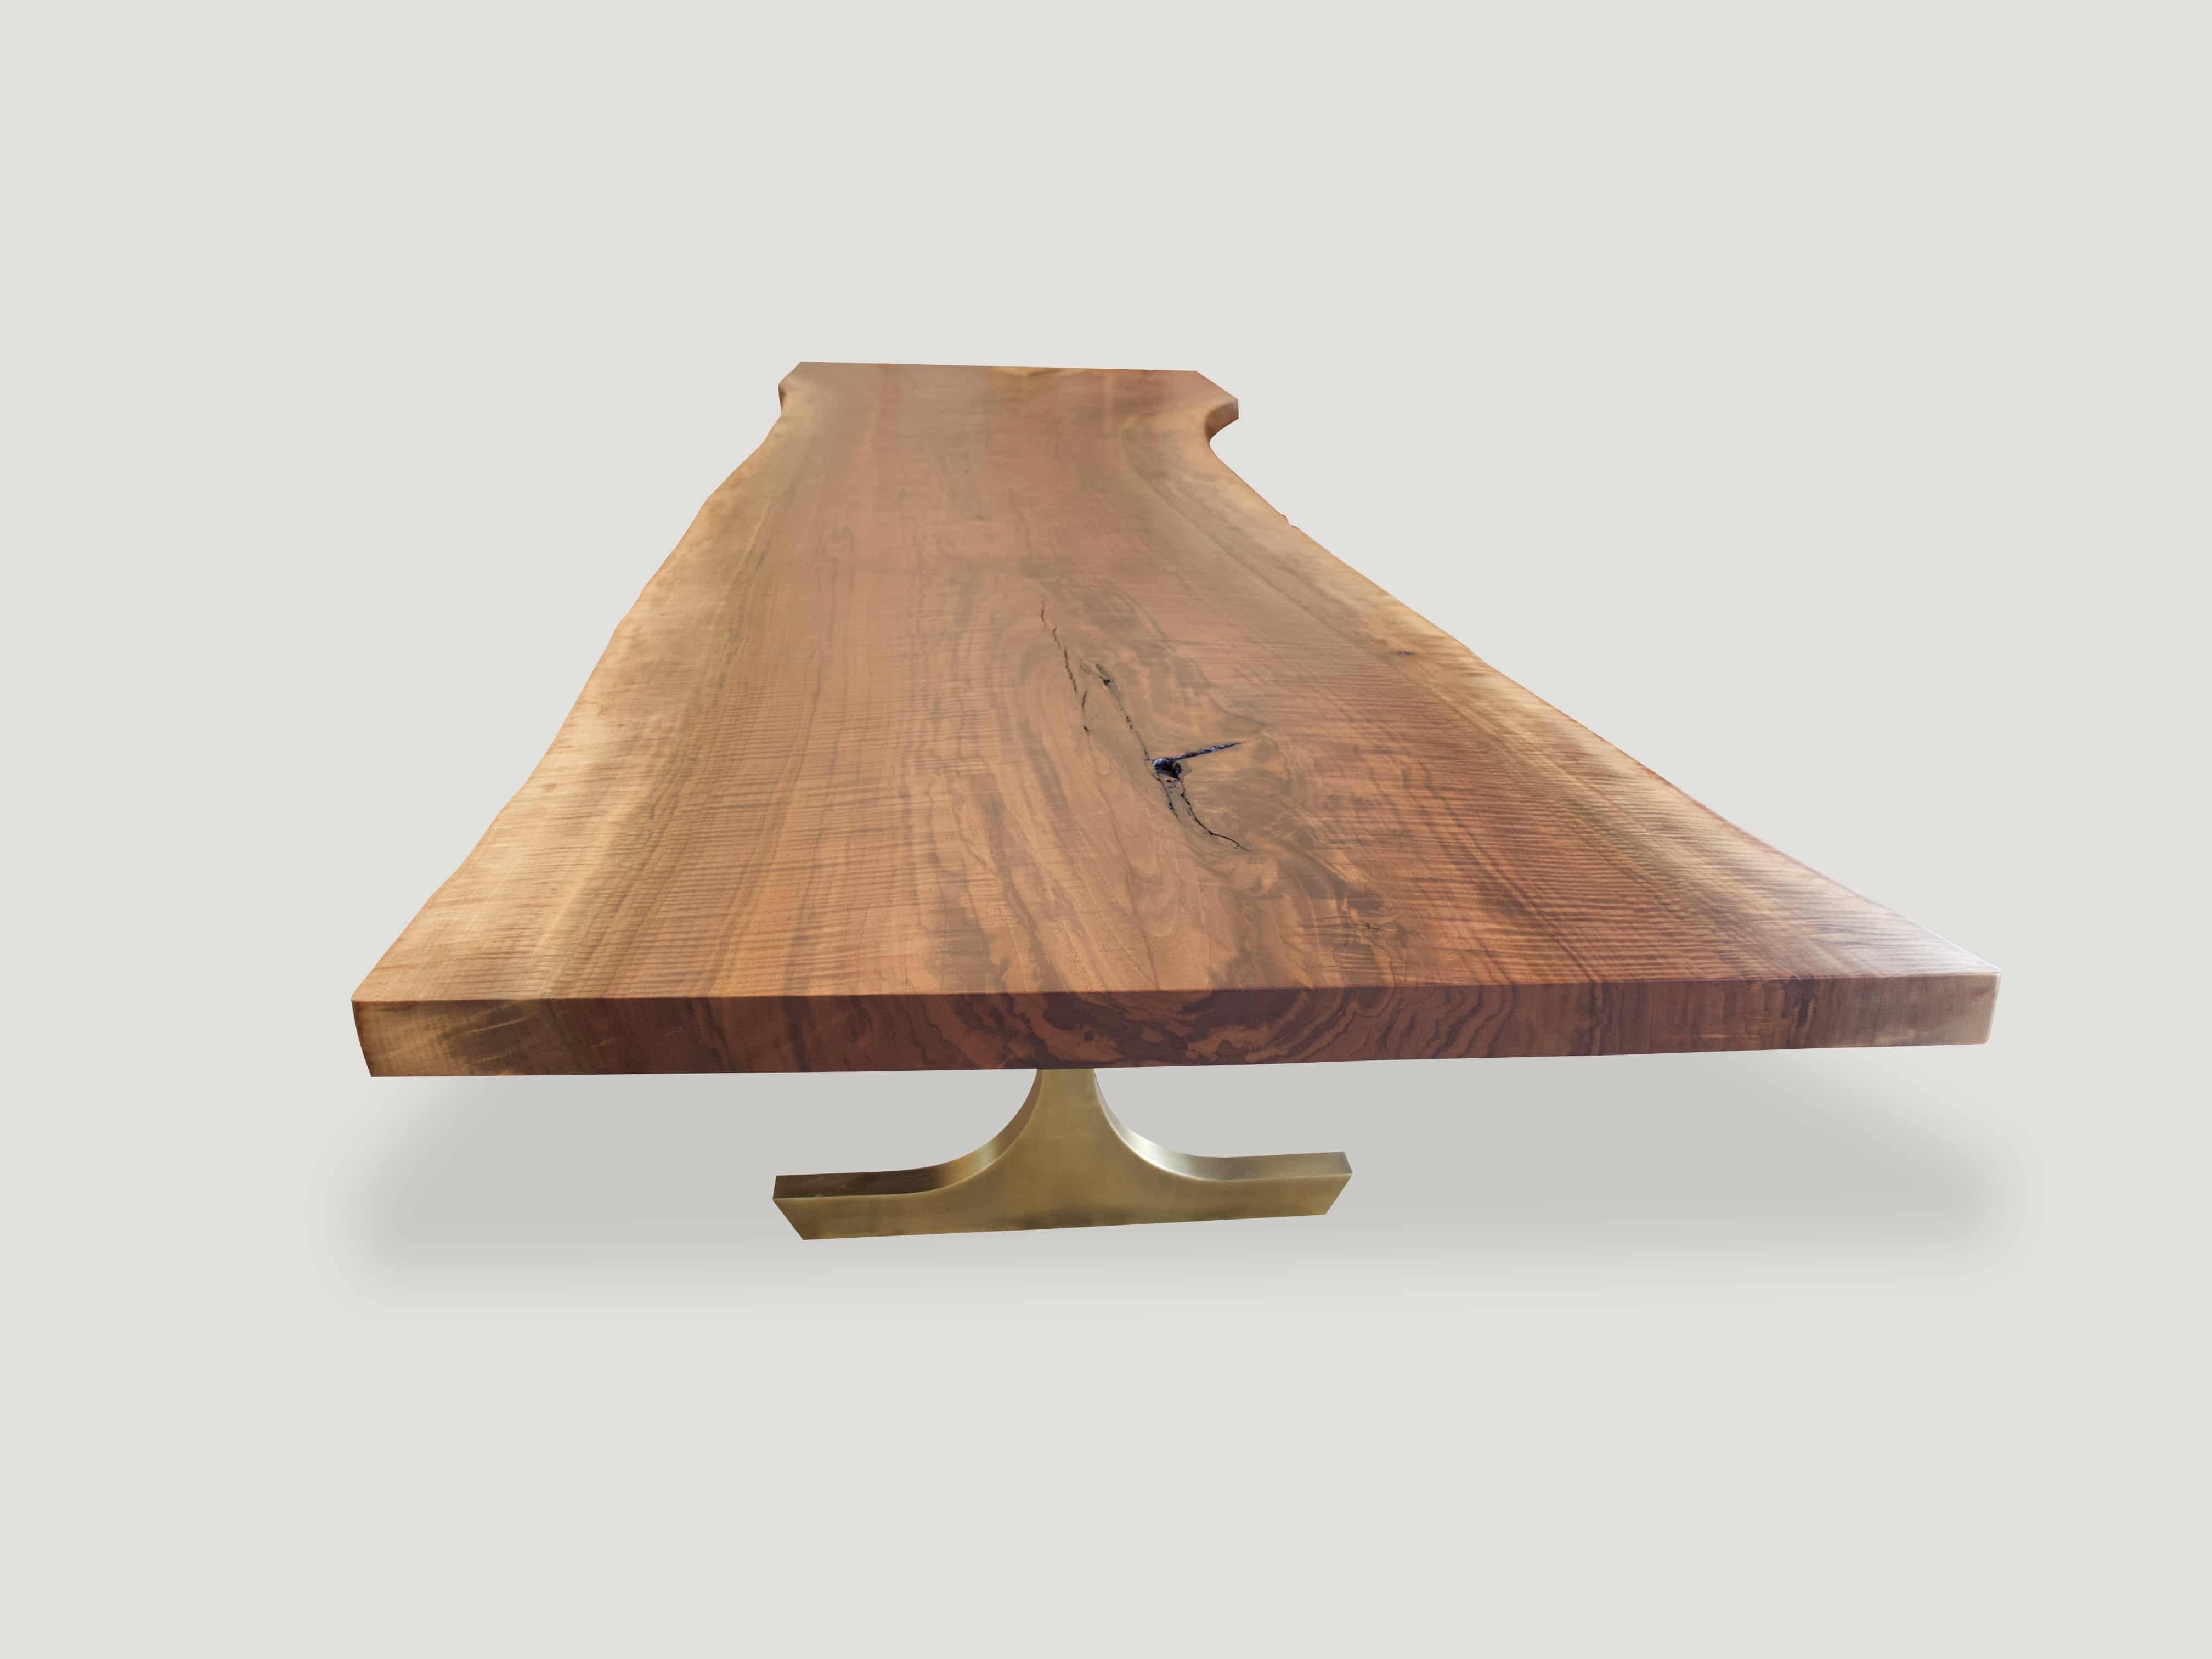 Featuring our Made In New York Collection. Impressive hand made live edge walnut dining table with a custom bronze base. All slabs are hand selected. We only select the best.

Own an Andrianna Shamaris original.

Andrianna Shamaris. The Leader